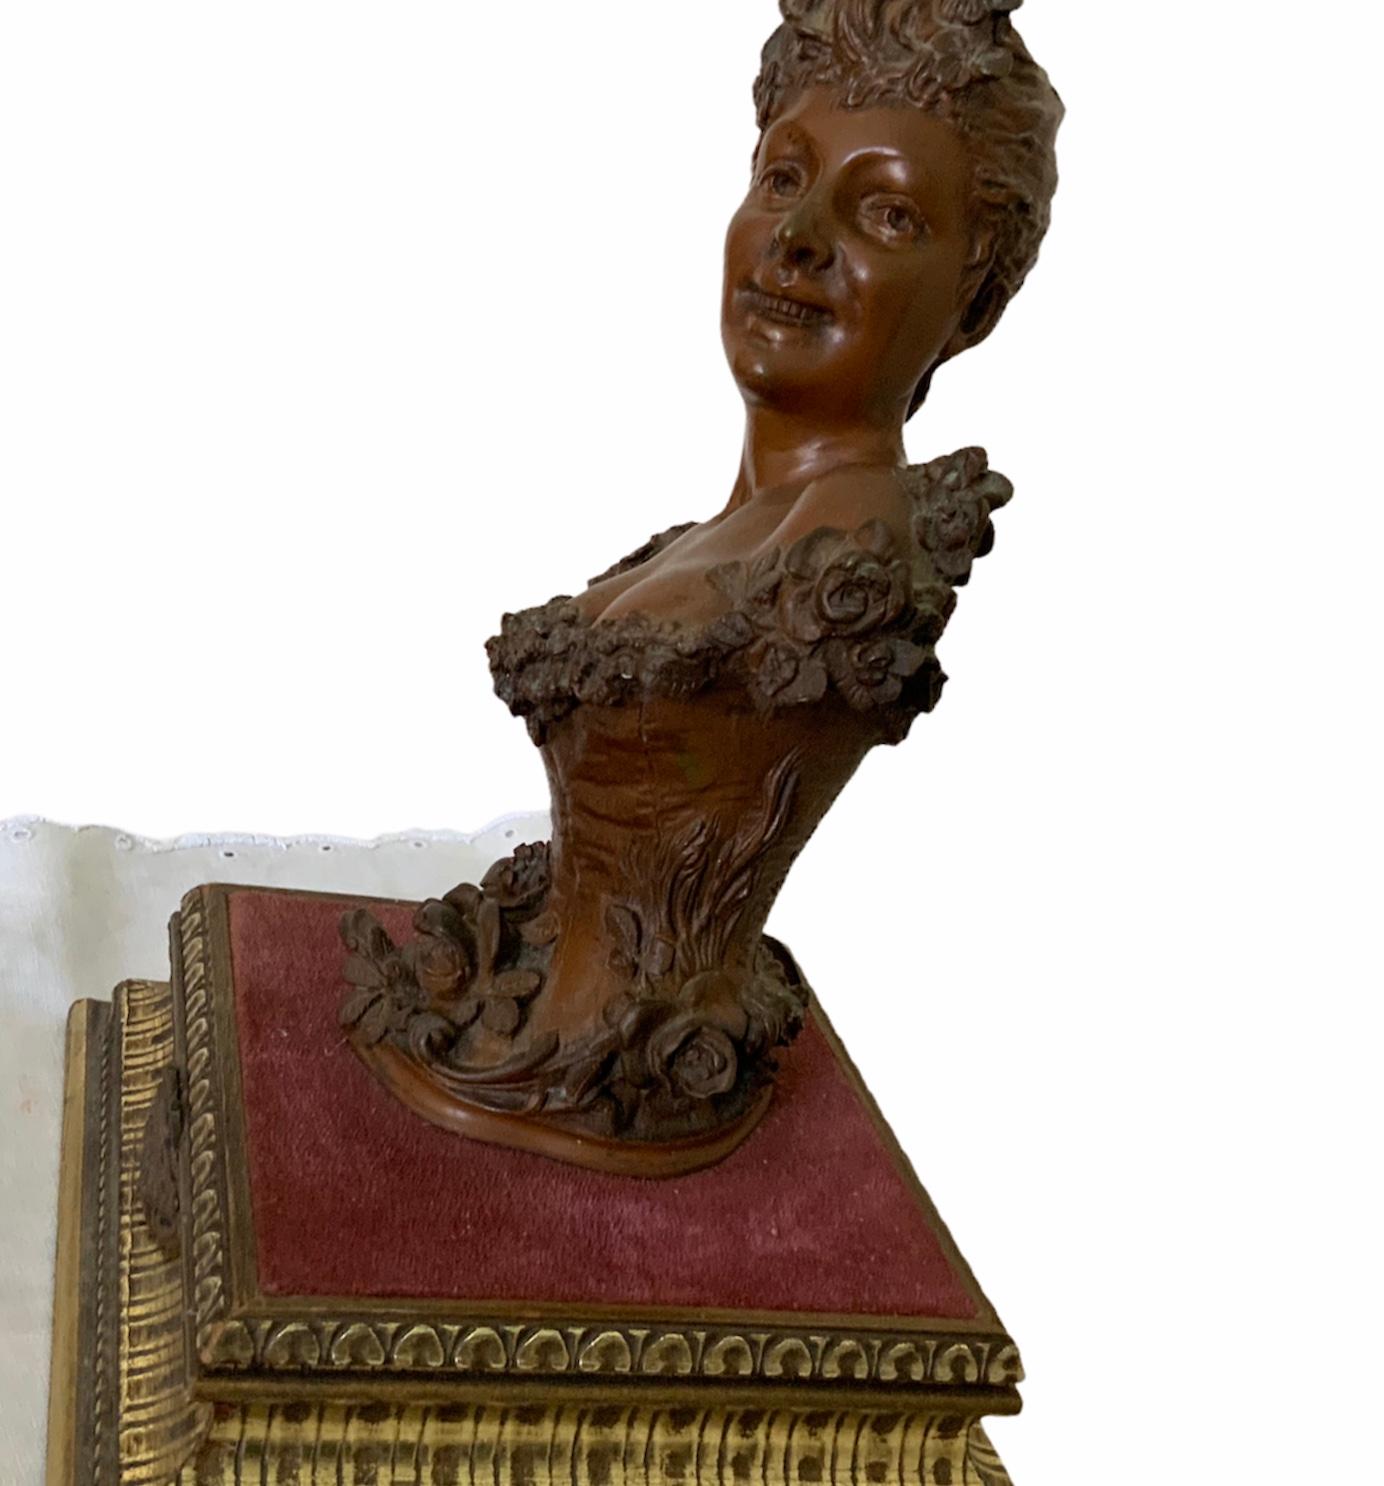 This is a Maurice Maignan bronze female bust sculpture. It depicts a young lady with a smile and wearing a tight corset adorned with an upper border full of ruffles. She also has like a garland of roses that start in her left shoulder and go around